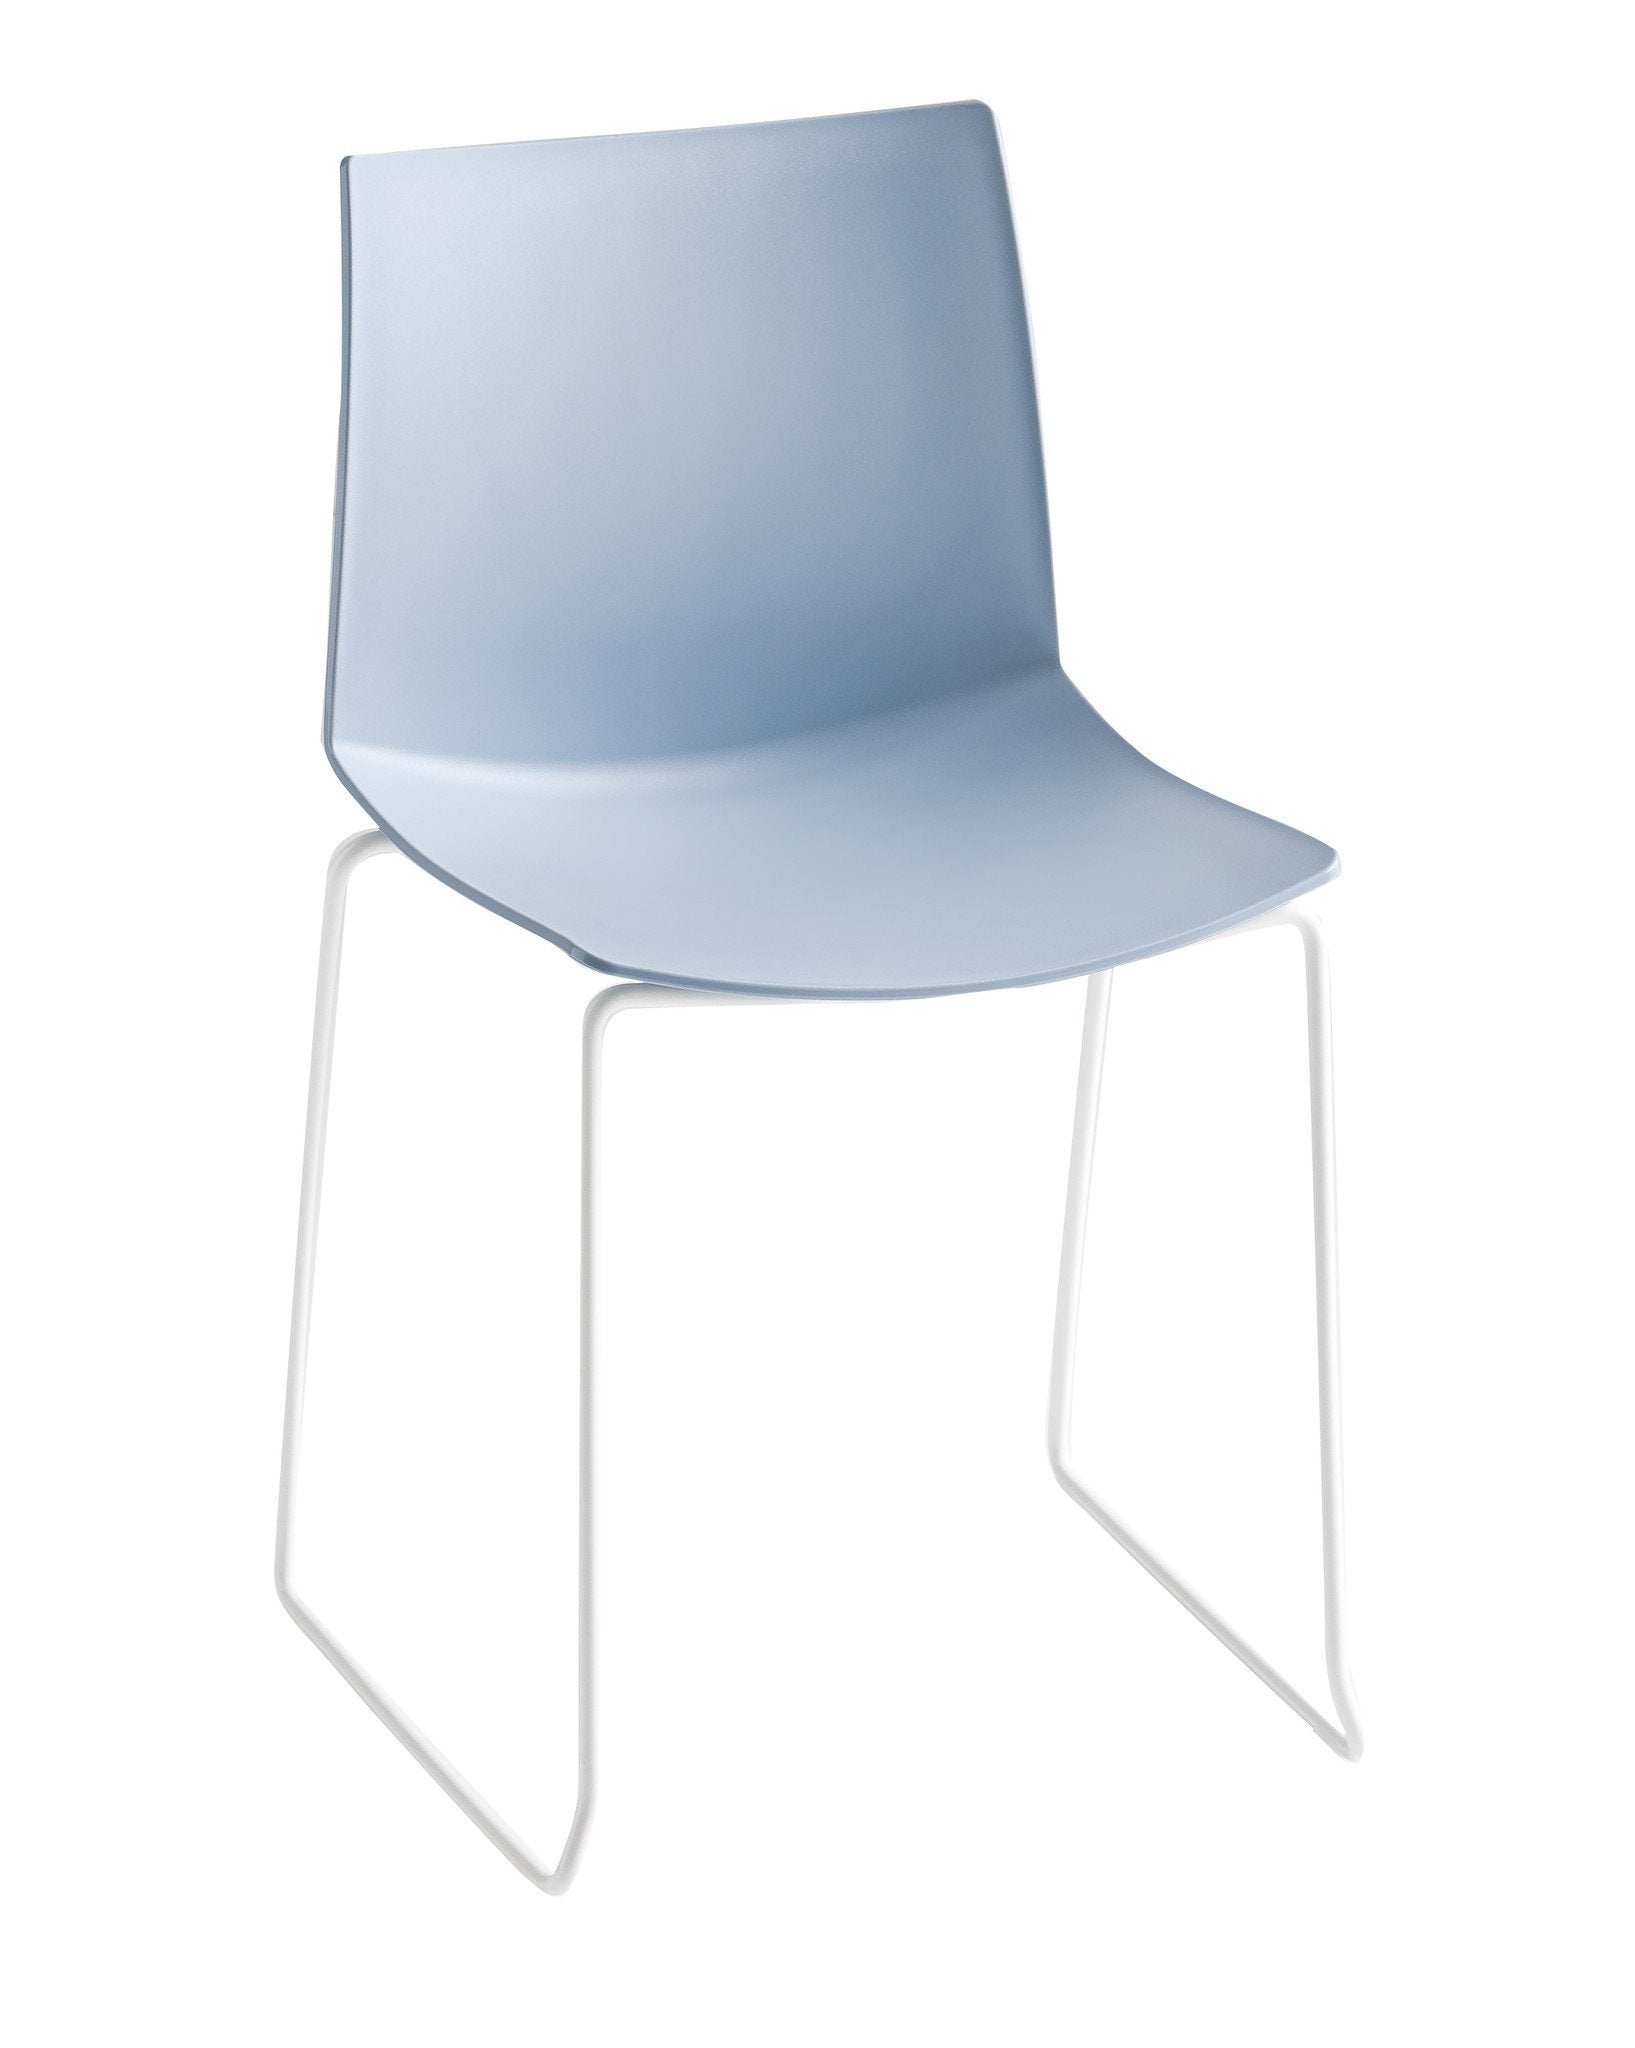 Kanvas Side Chair c/w Sled Legs-Gaber-Contract Furniture Store